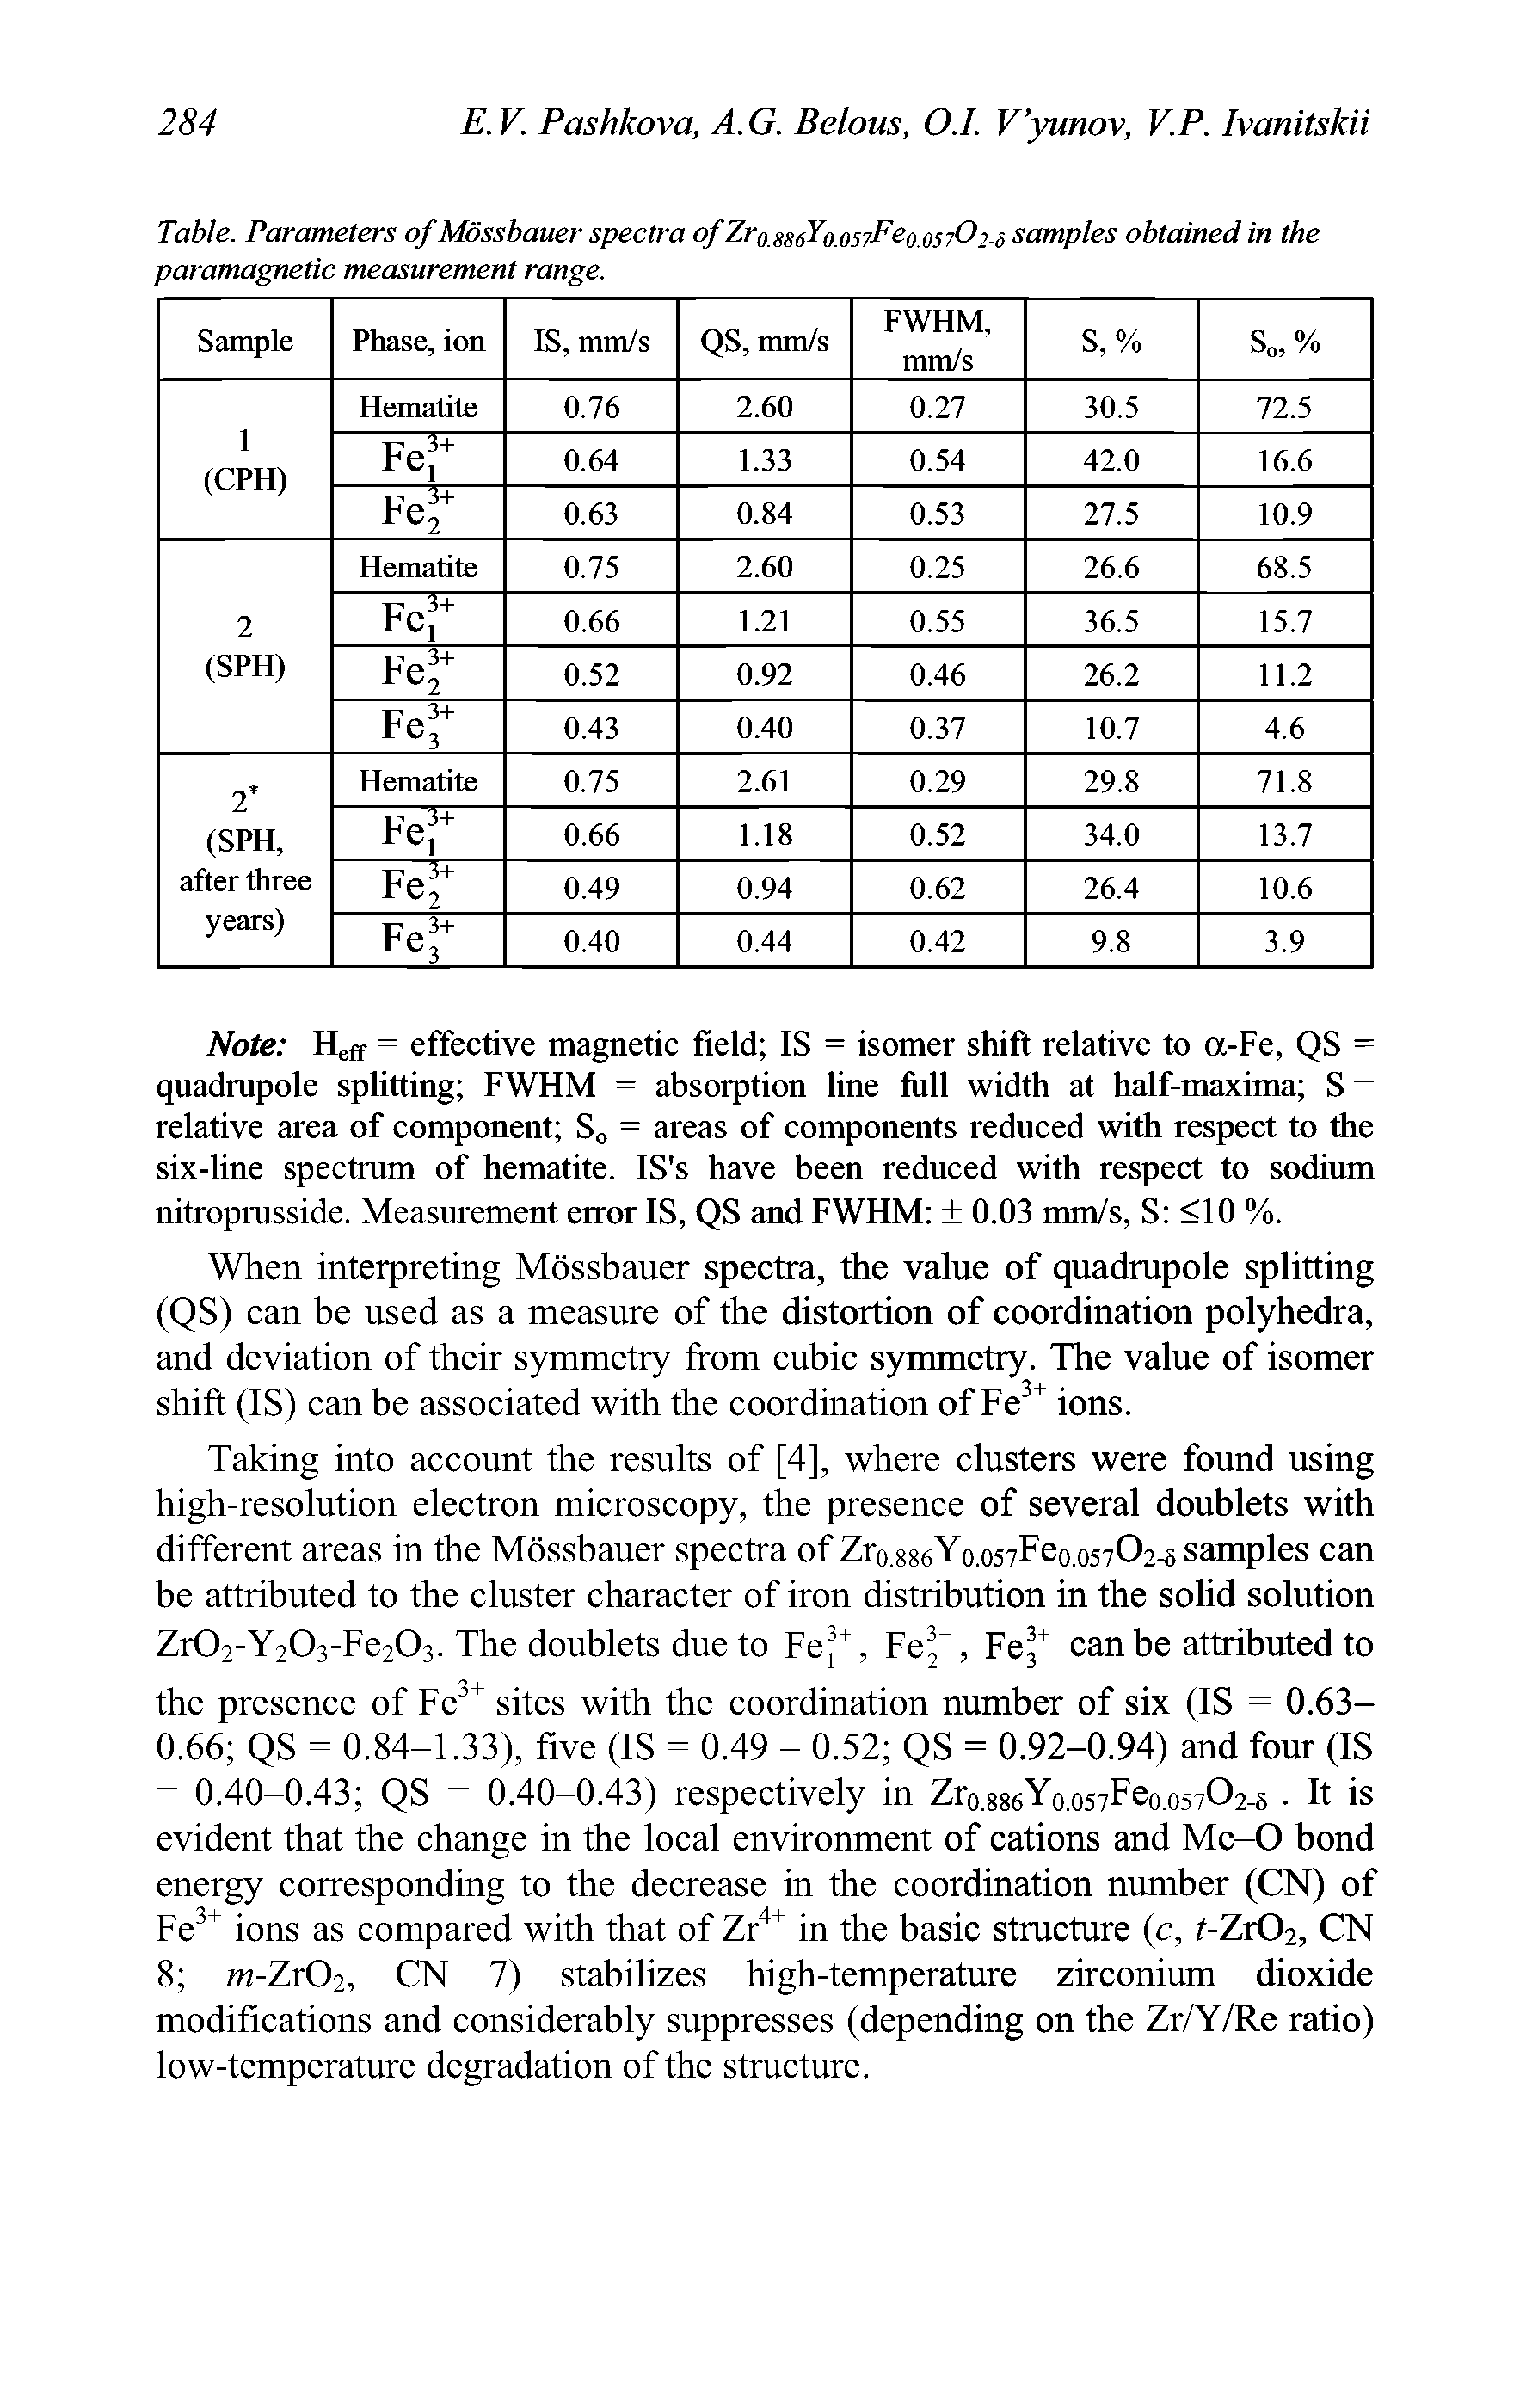 Table. Parameters of Mossbauer spectra of Zro ssdYo.ostFeo 05702.3 samples obtained in the paramagnetic measurement range.